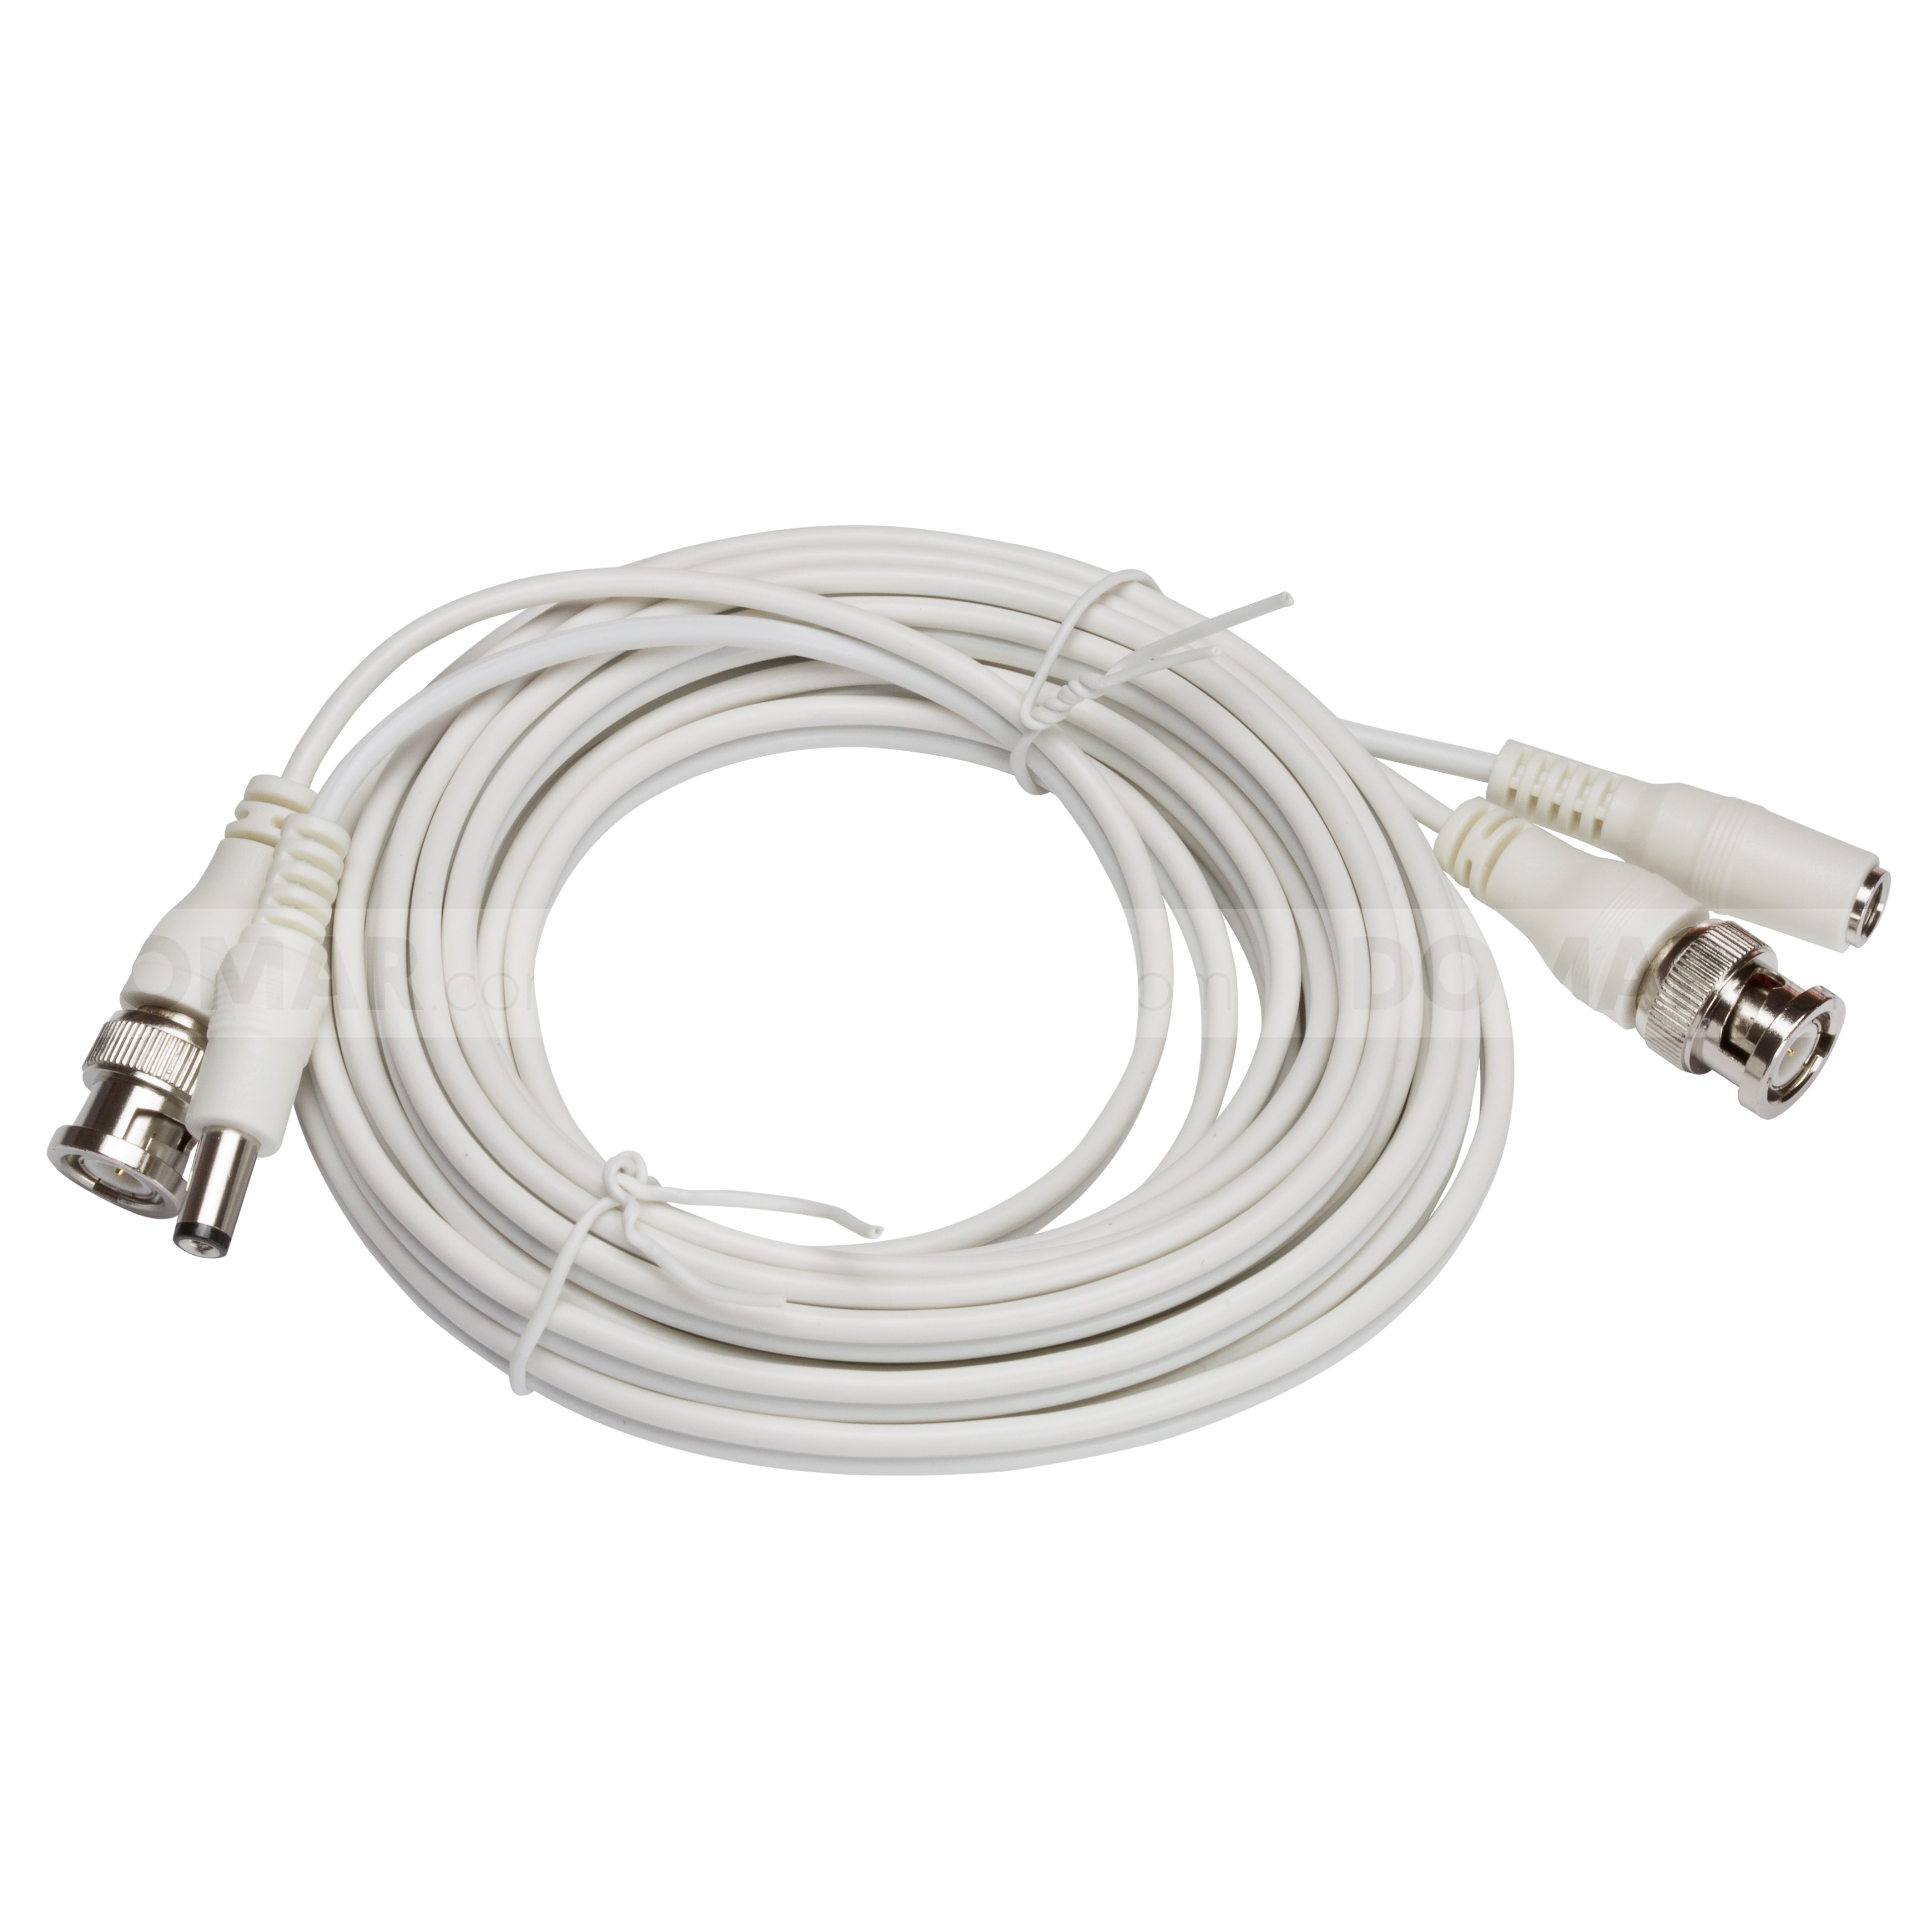 Zxtech 5M White Pre-Made RG59 Siamese Cable